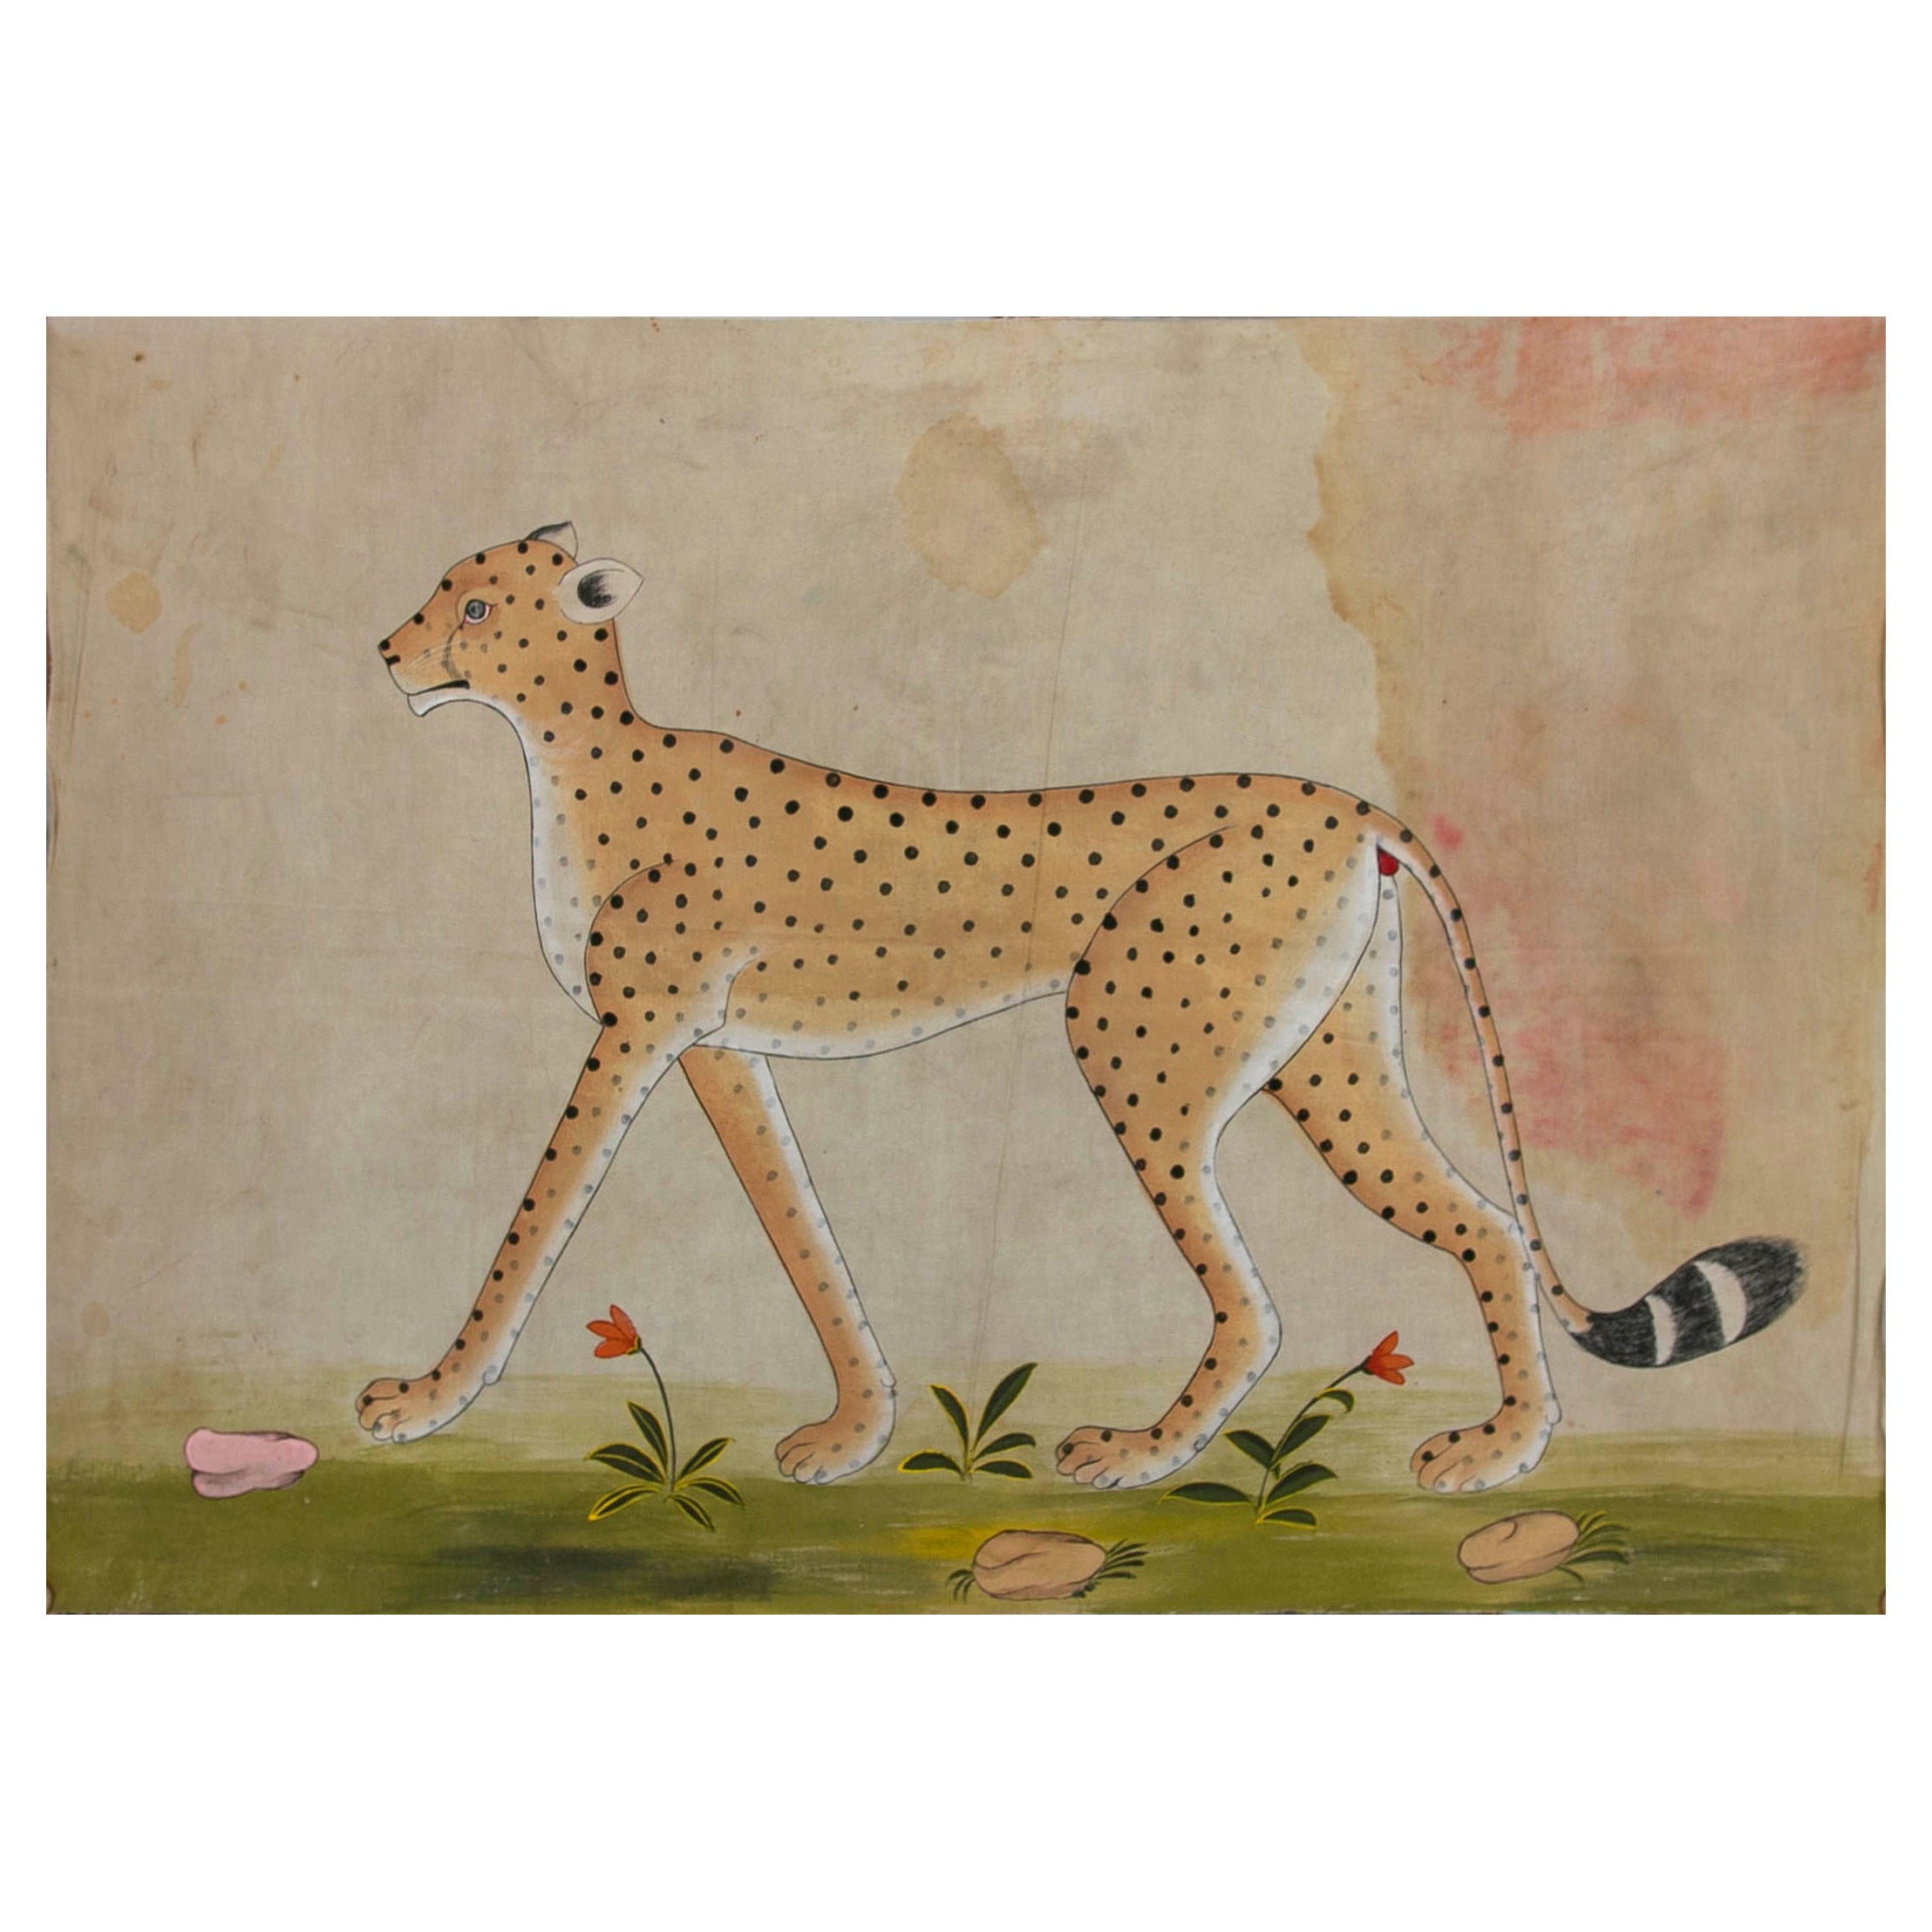 1970s Jaime Parlade Designer Hand Painting “Cheetah" Oil on Canvas For Sale